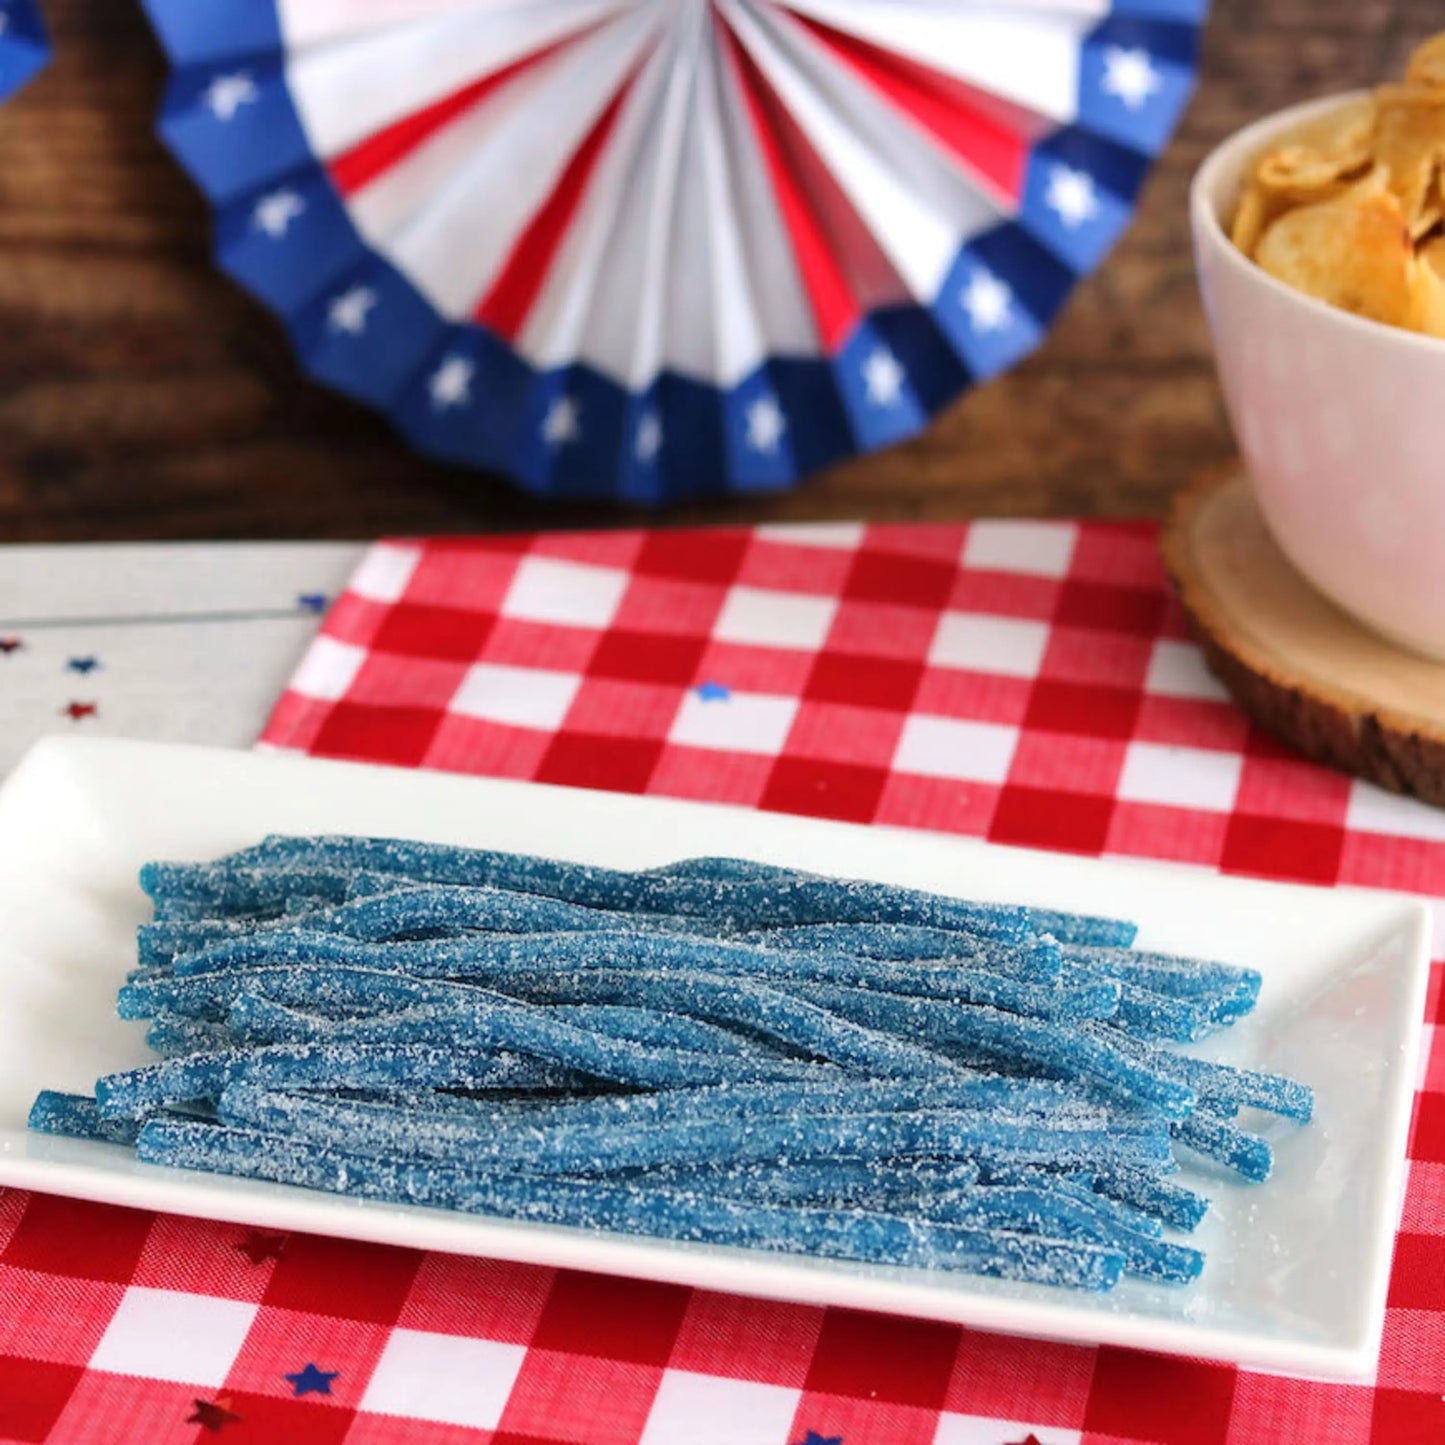 Sour Punch Blue Raspberry Straws Candy on a picnic table with patriotic decorations